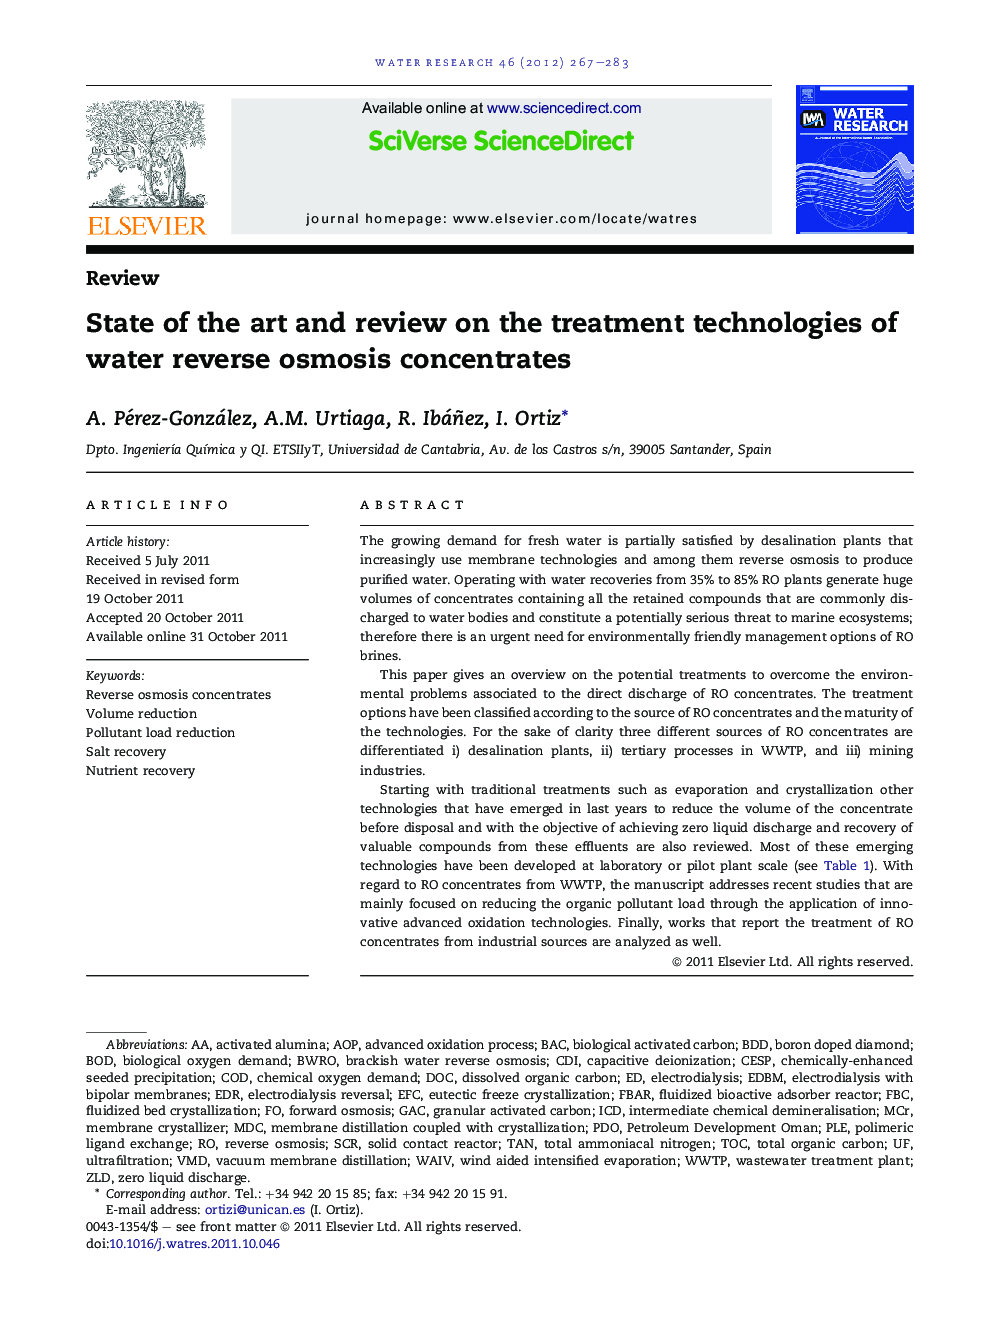 State of the art and review on the treatment technologies of water reverse osmosis concentrates